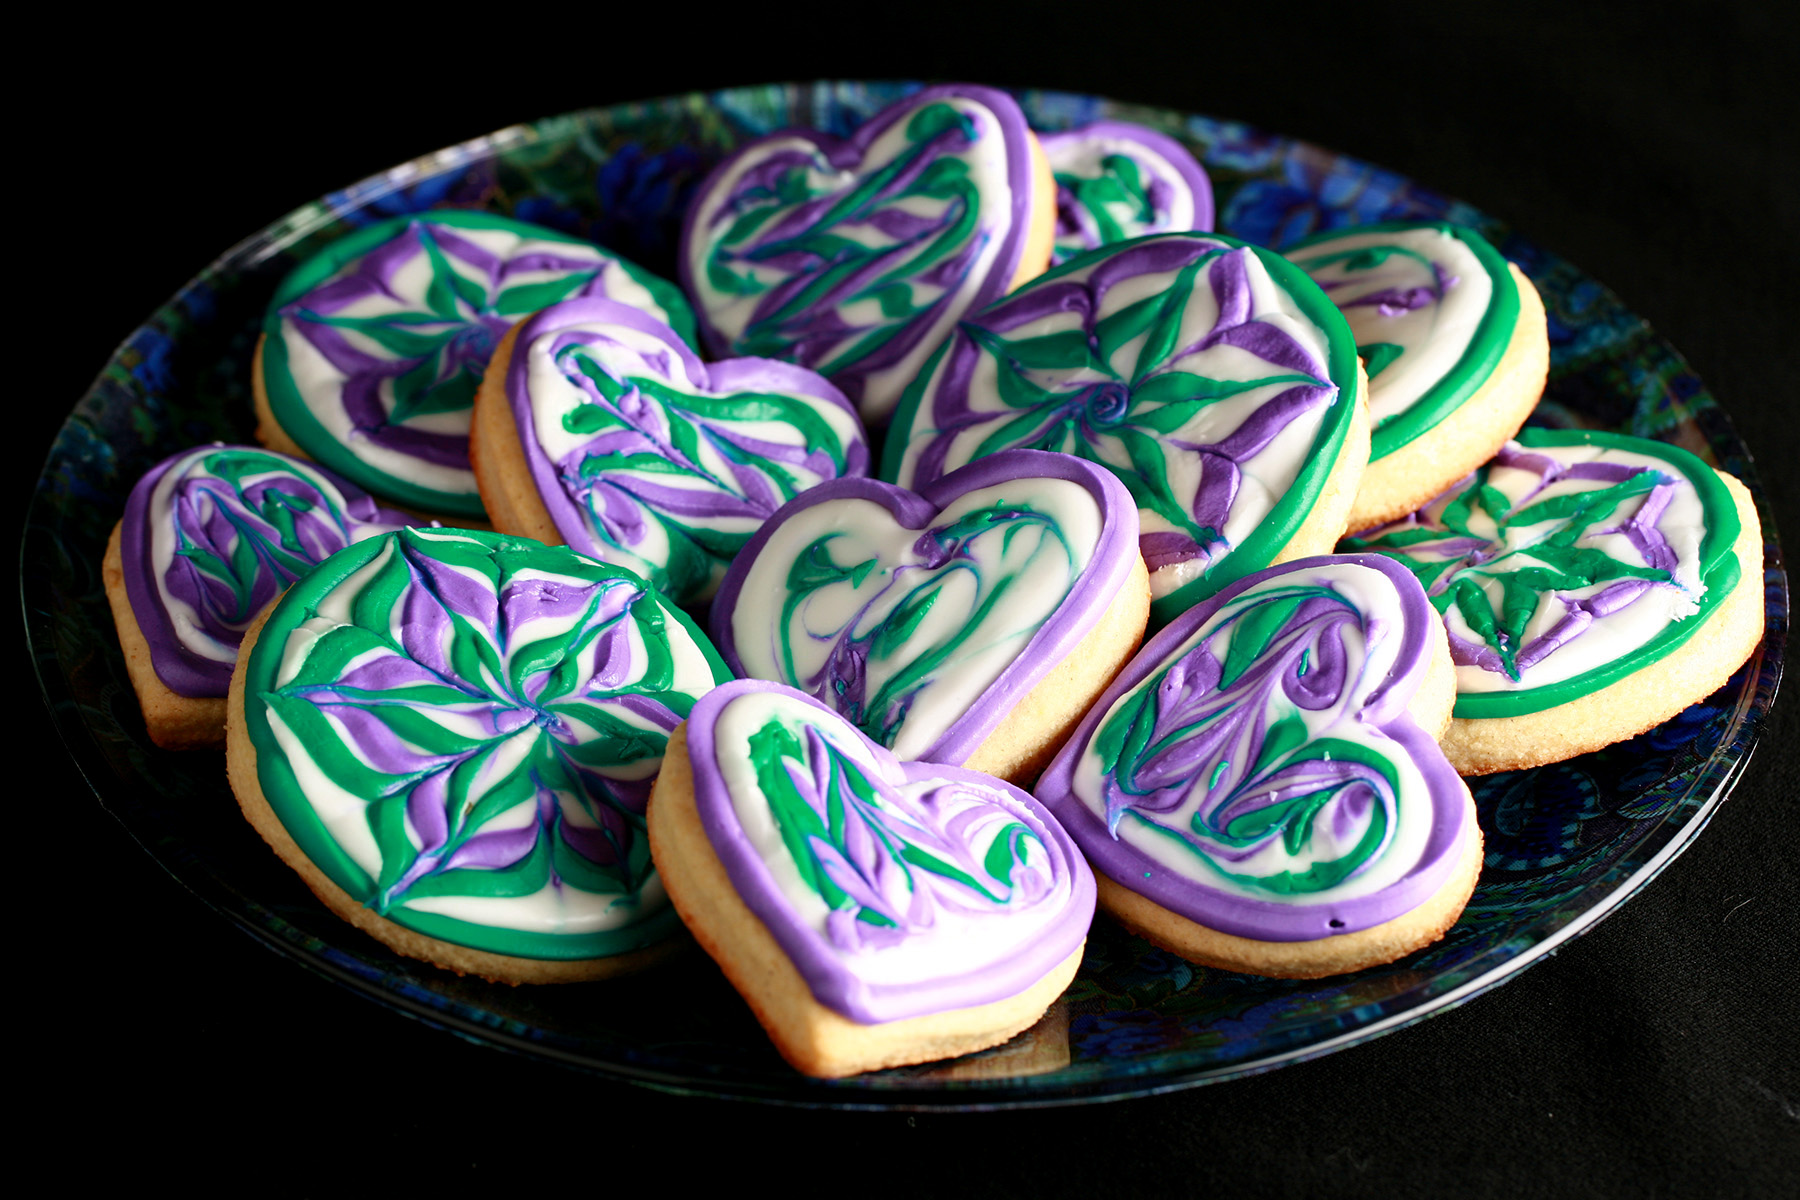 Close up view of a plate of heart shaped gluten-free sugar cookies. They are decorated with swirls of teal and lavender over a base of white frosting.